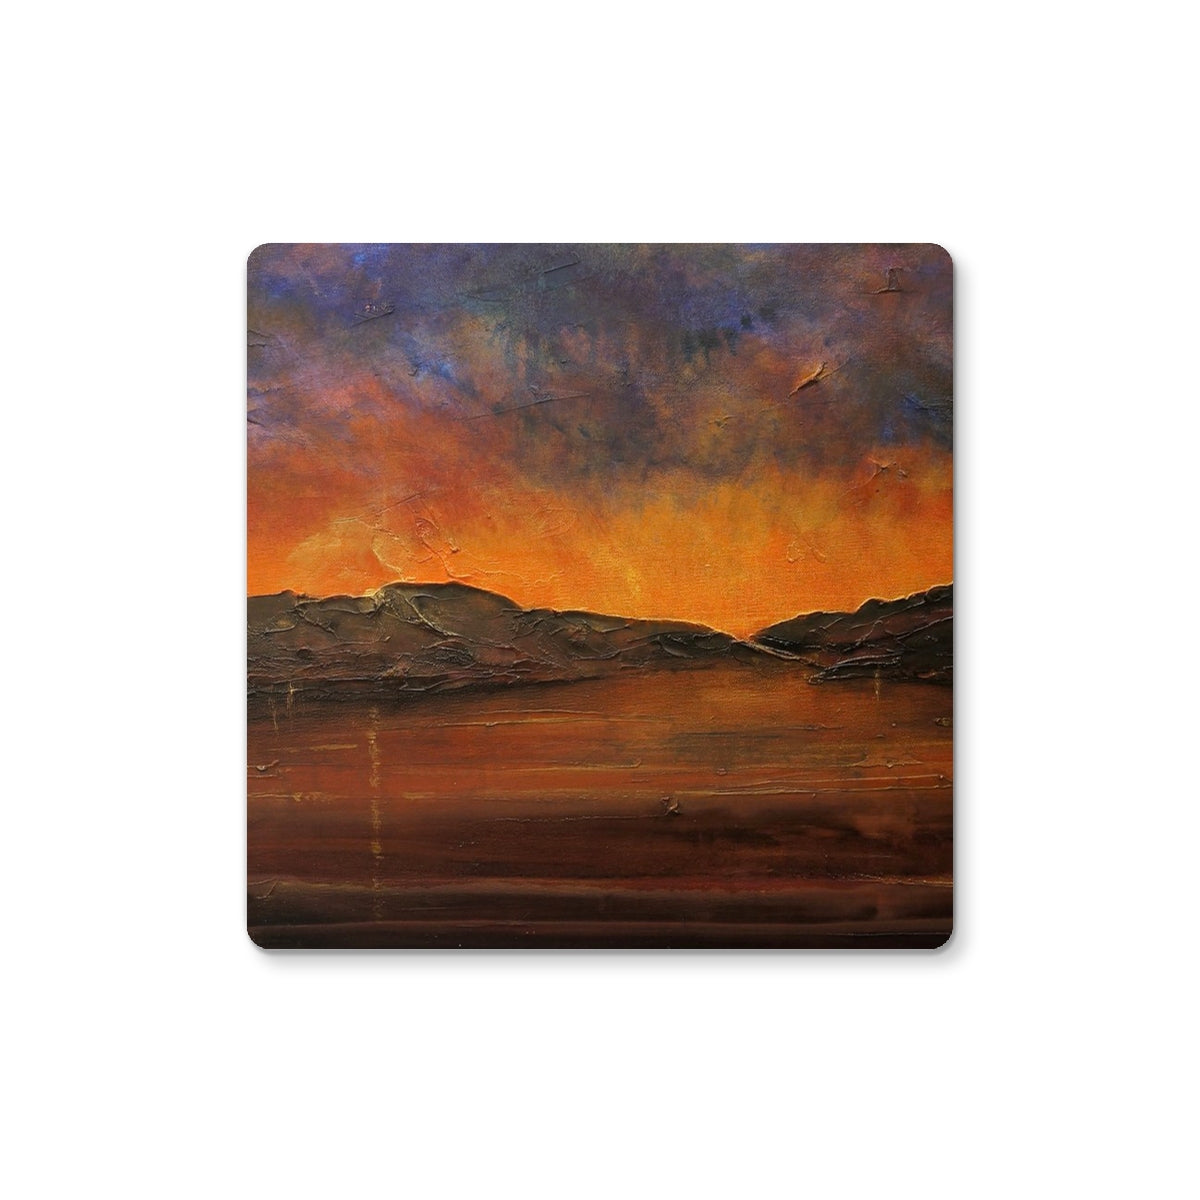 A Brooding Clyde Dusk Art Gifts Coaster-Coasters-River Clyde Art Gallery-2 Coasters-Paintings, Prints, Homeware, Art Gifts From Scotland By Scottish Artist Kevin Hunter